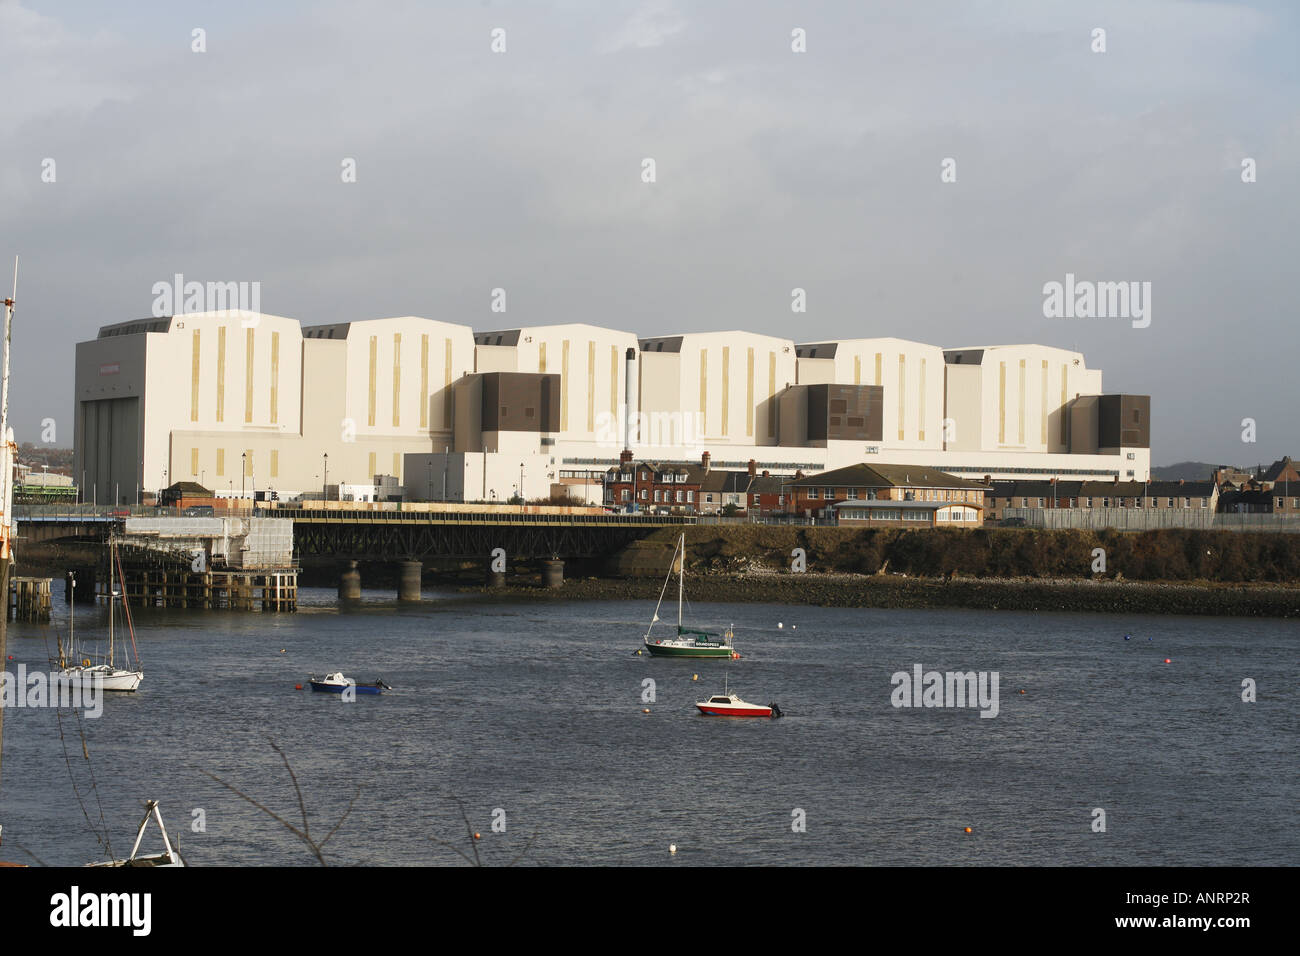 BAE Systems Submarine Factory, Barrow-in-Furness, Cumbria, Viewed from across Walney Channel Stock Photo